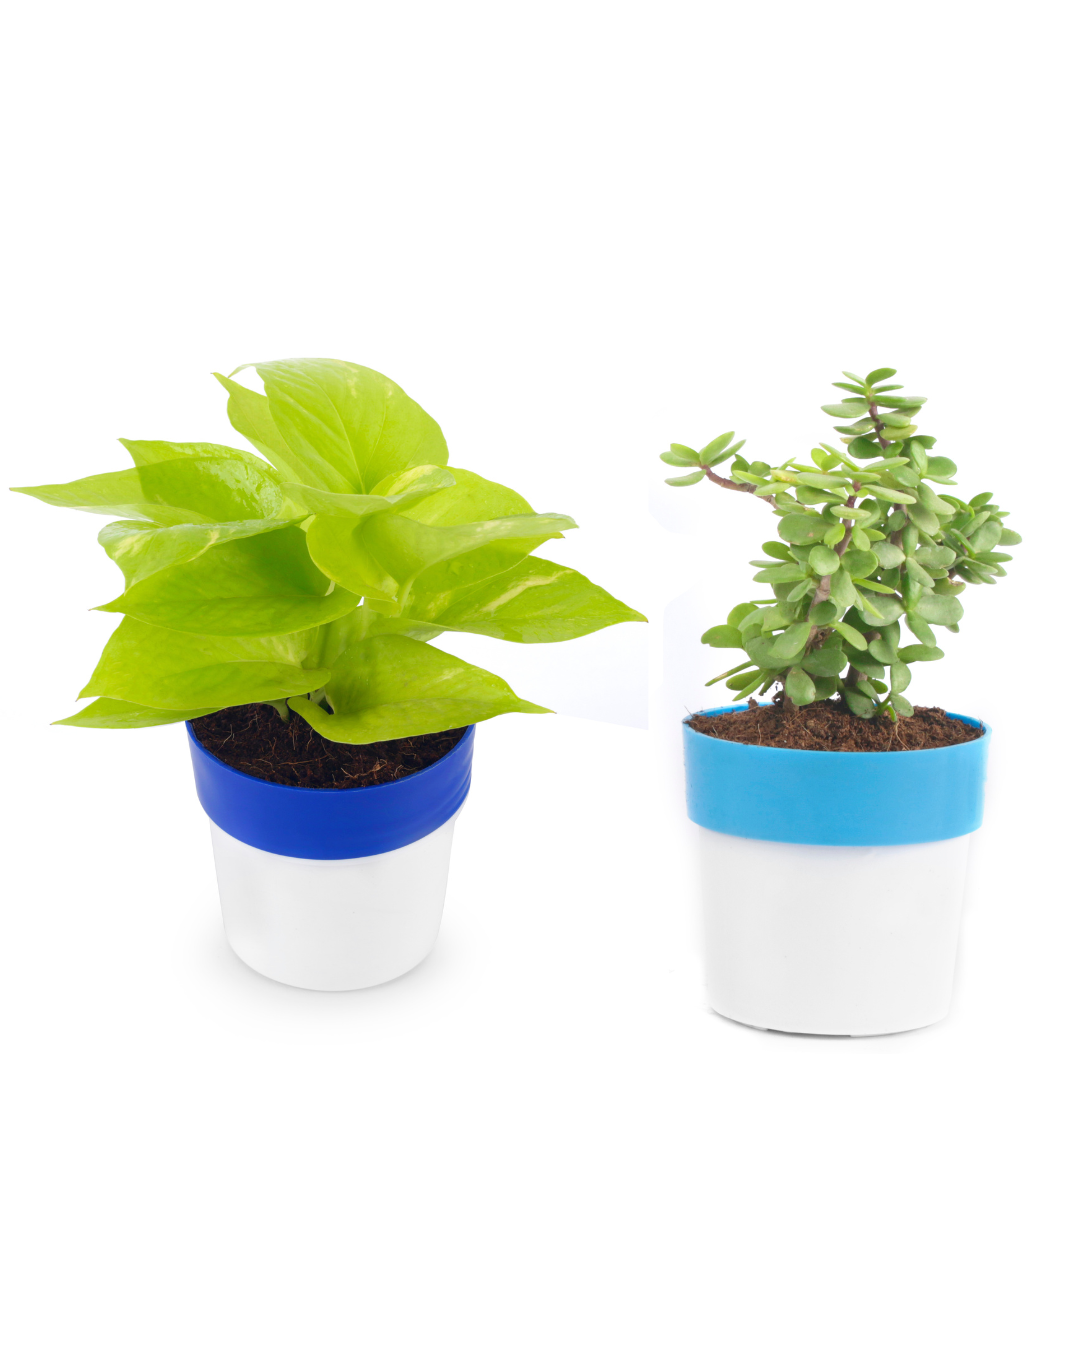 Golden Money Plant With Jade Plant with Blue/White Plastic Pot